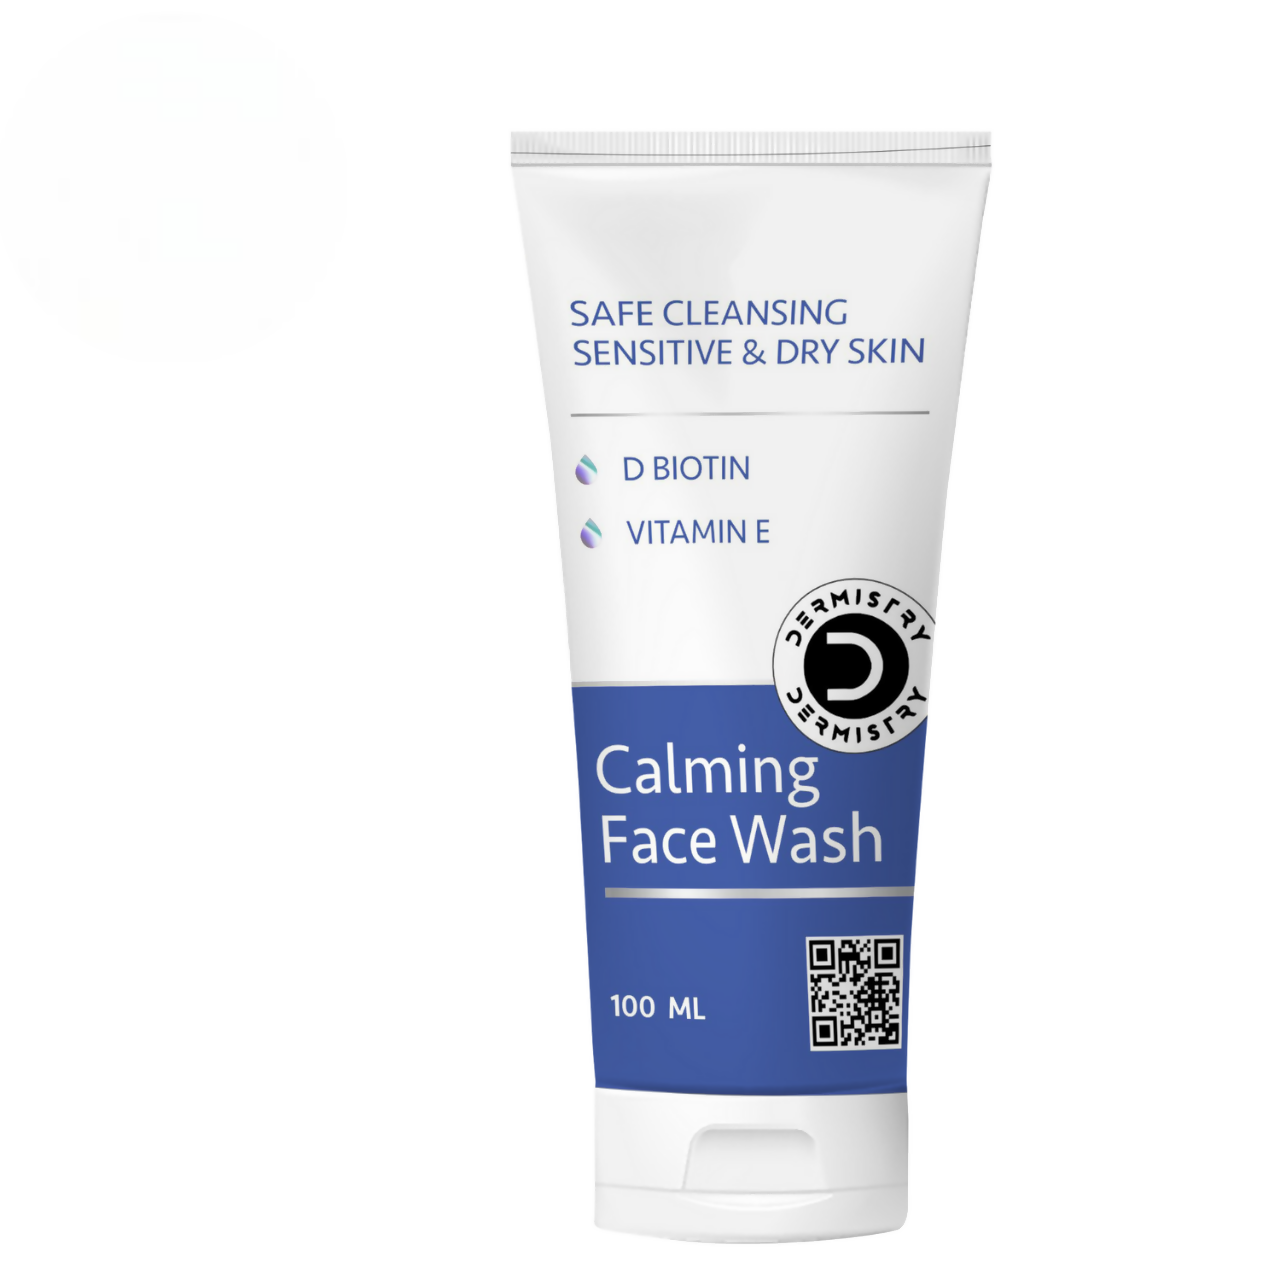 Dermistry Sensitive & Dry Skin Care Calming Soothing Face Wash Safe Cleansing D Biotin & Vitamin E - usa canada australia